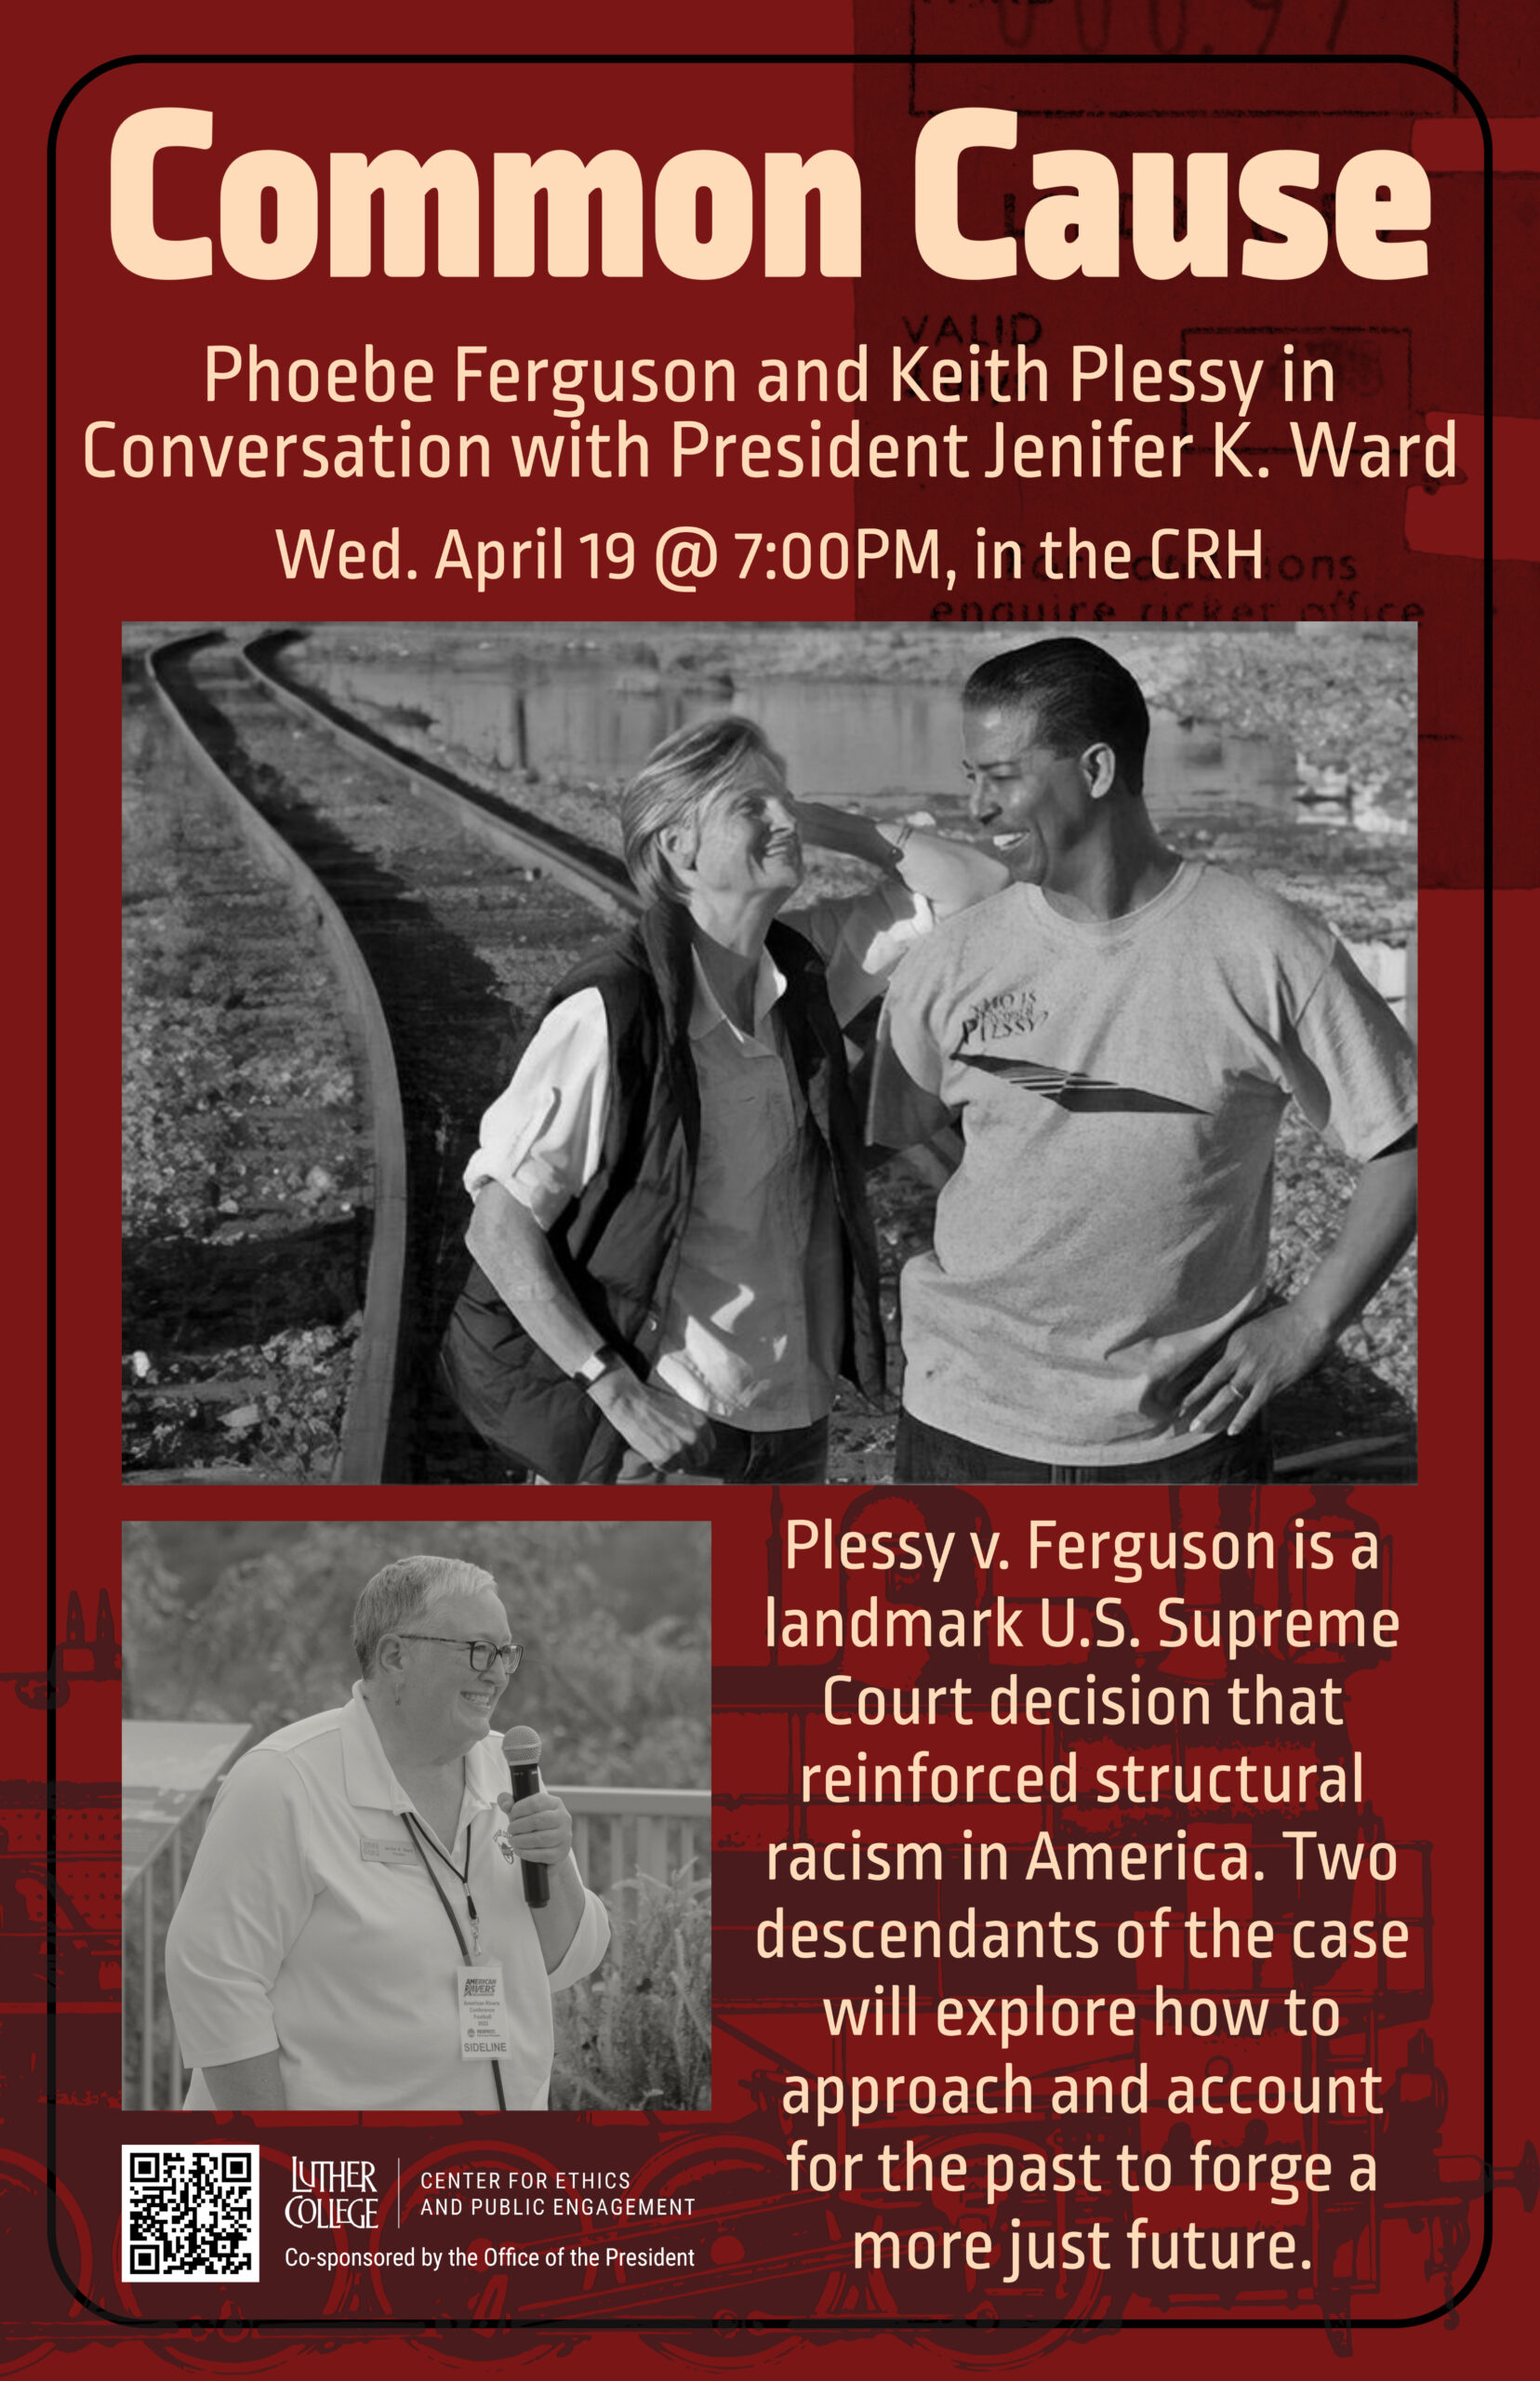 Common Cause: Phoebe Ferguson and Keith Plessy in Conversation with President Jenifer K. Ward thumbnail